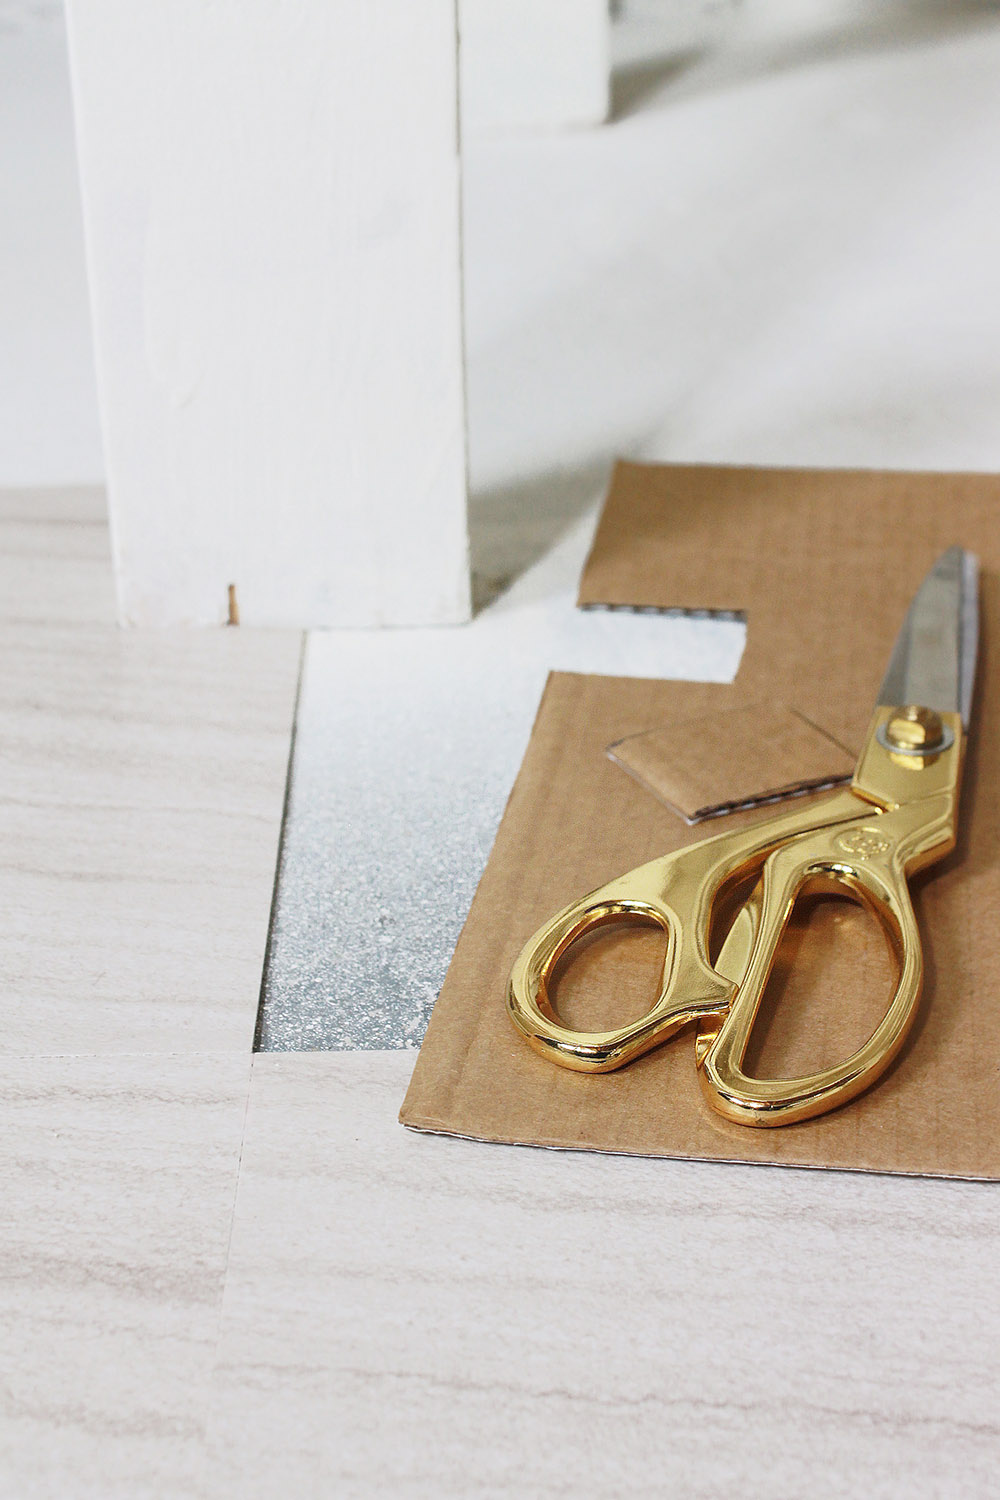 A piece of cardboard with a cutout creates a template for peel and stick tile flooring.